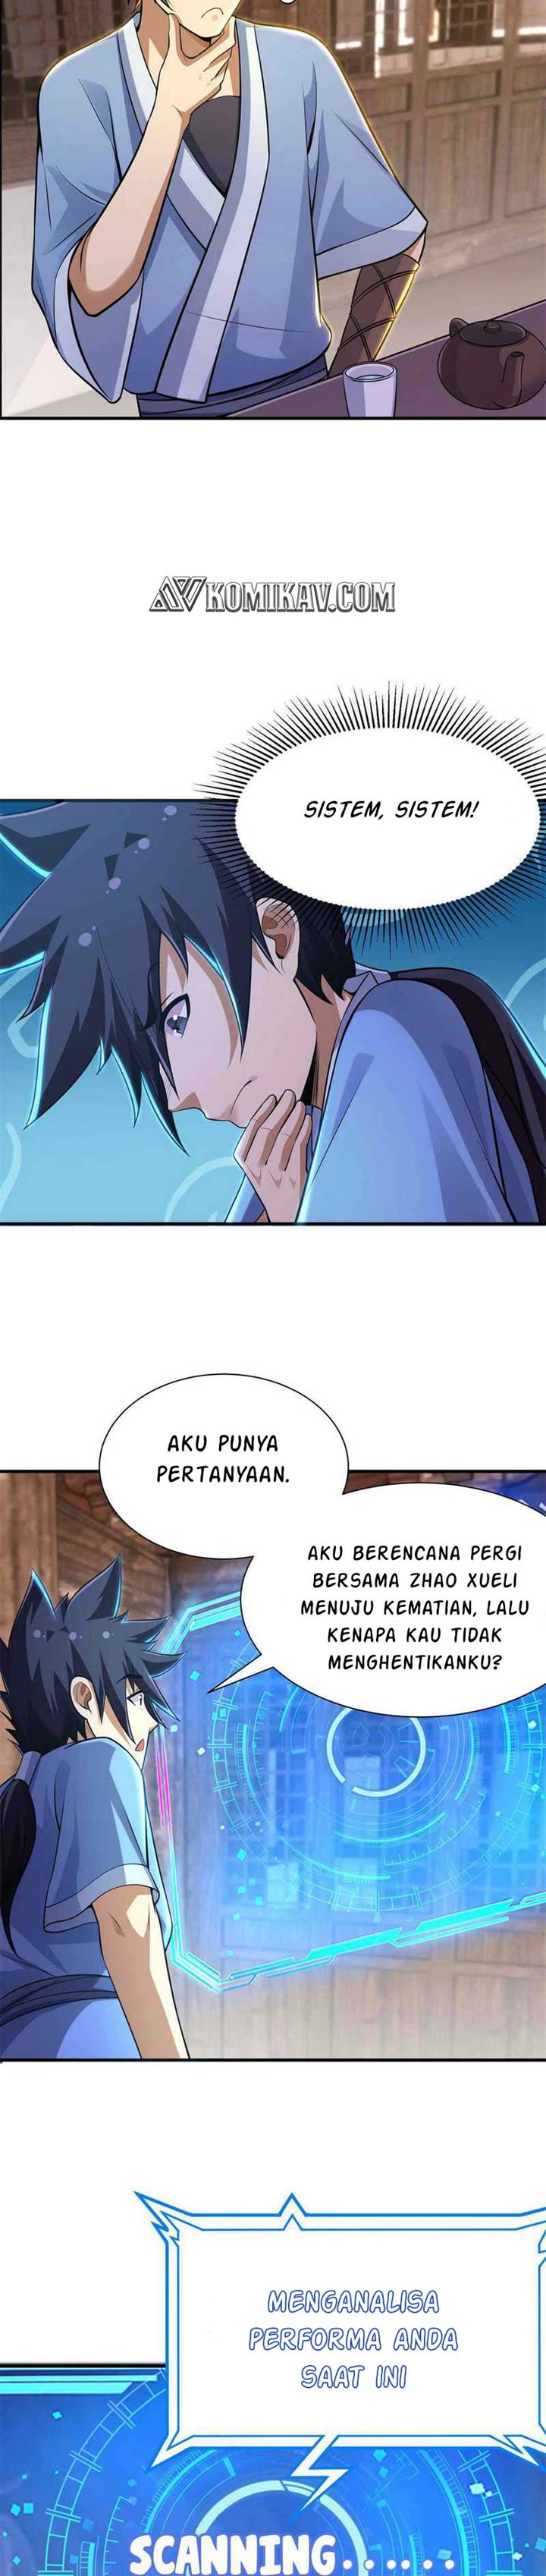 Dilarang COPAS - situs resmi www.mangacanblog.com - Komik i just want to be beaten to death by everyone 021 - chapter 21 22 Indonesia i just want to be beaten to death by everyone 021 - chapter 21 Terbaru 11|Baca Manga Komik Indonesia|Mangacan